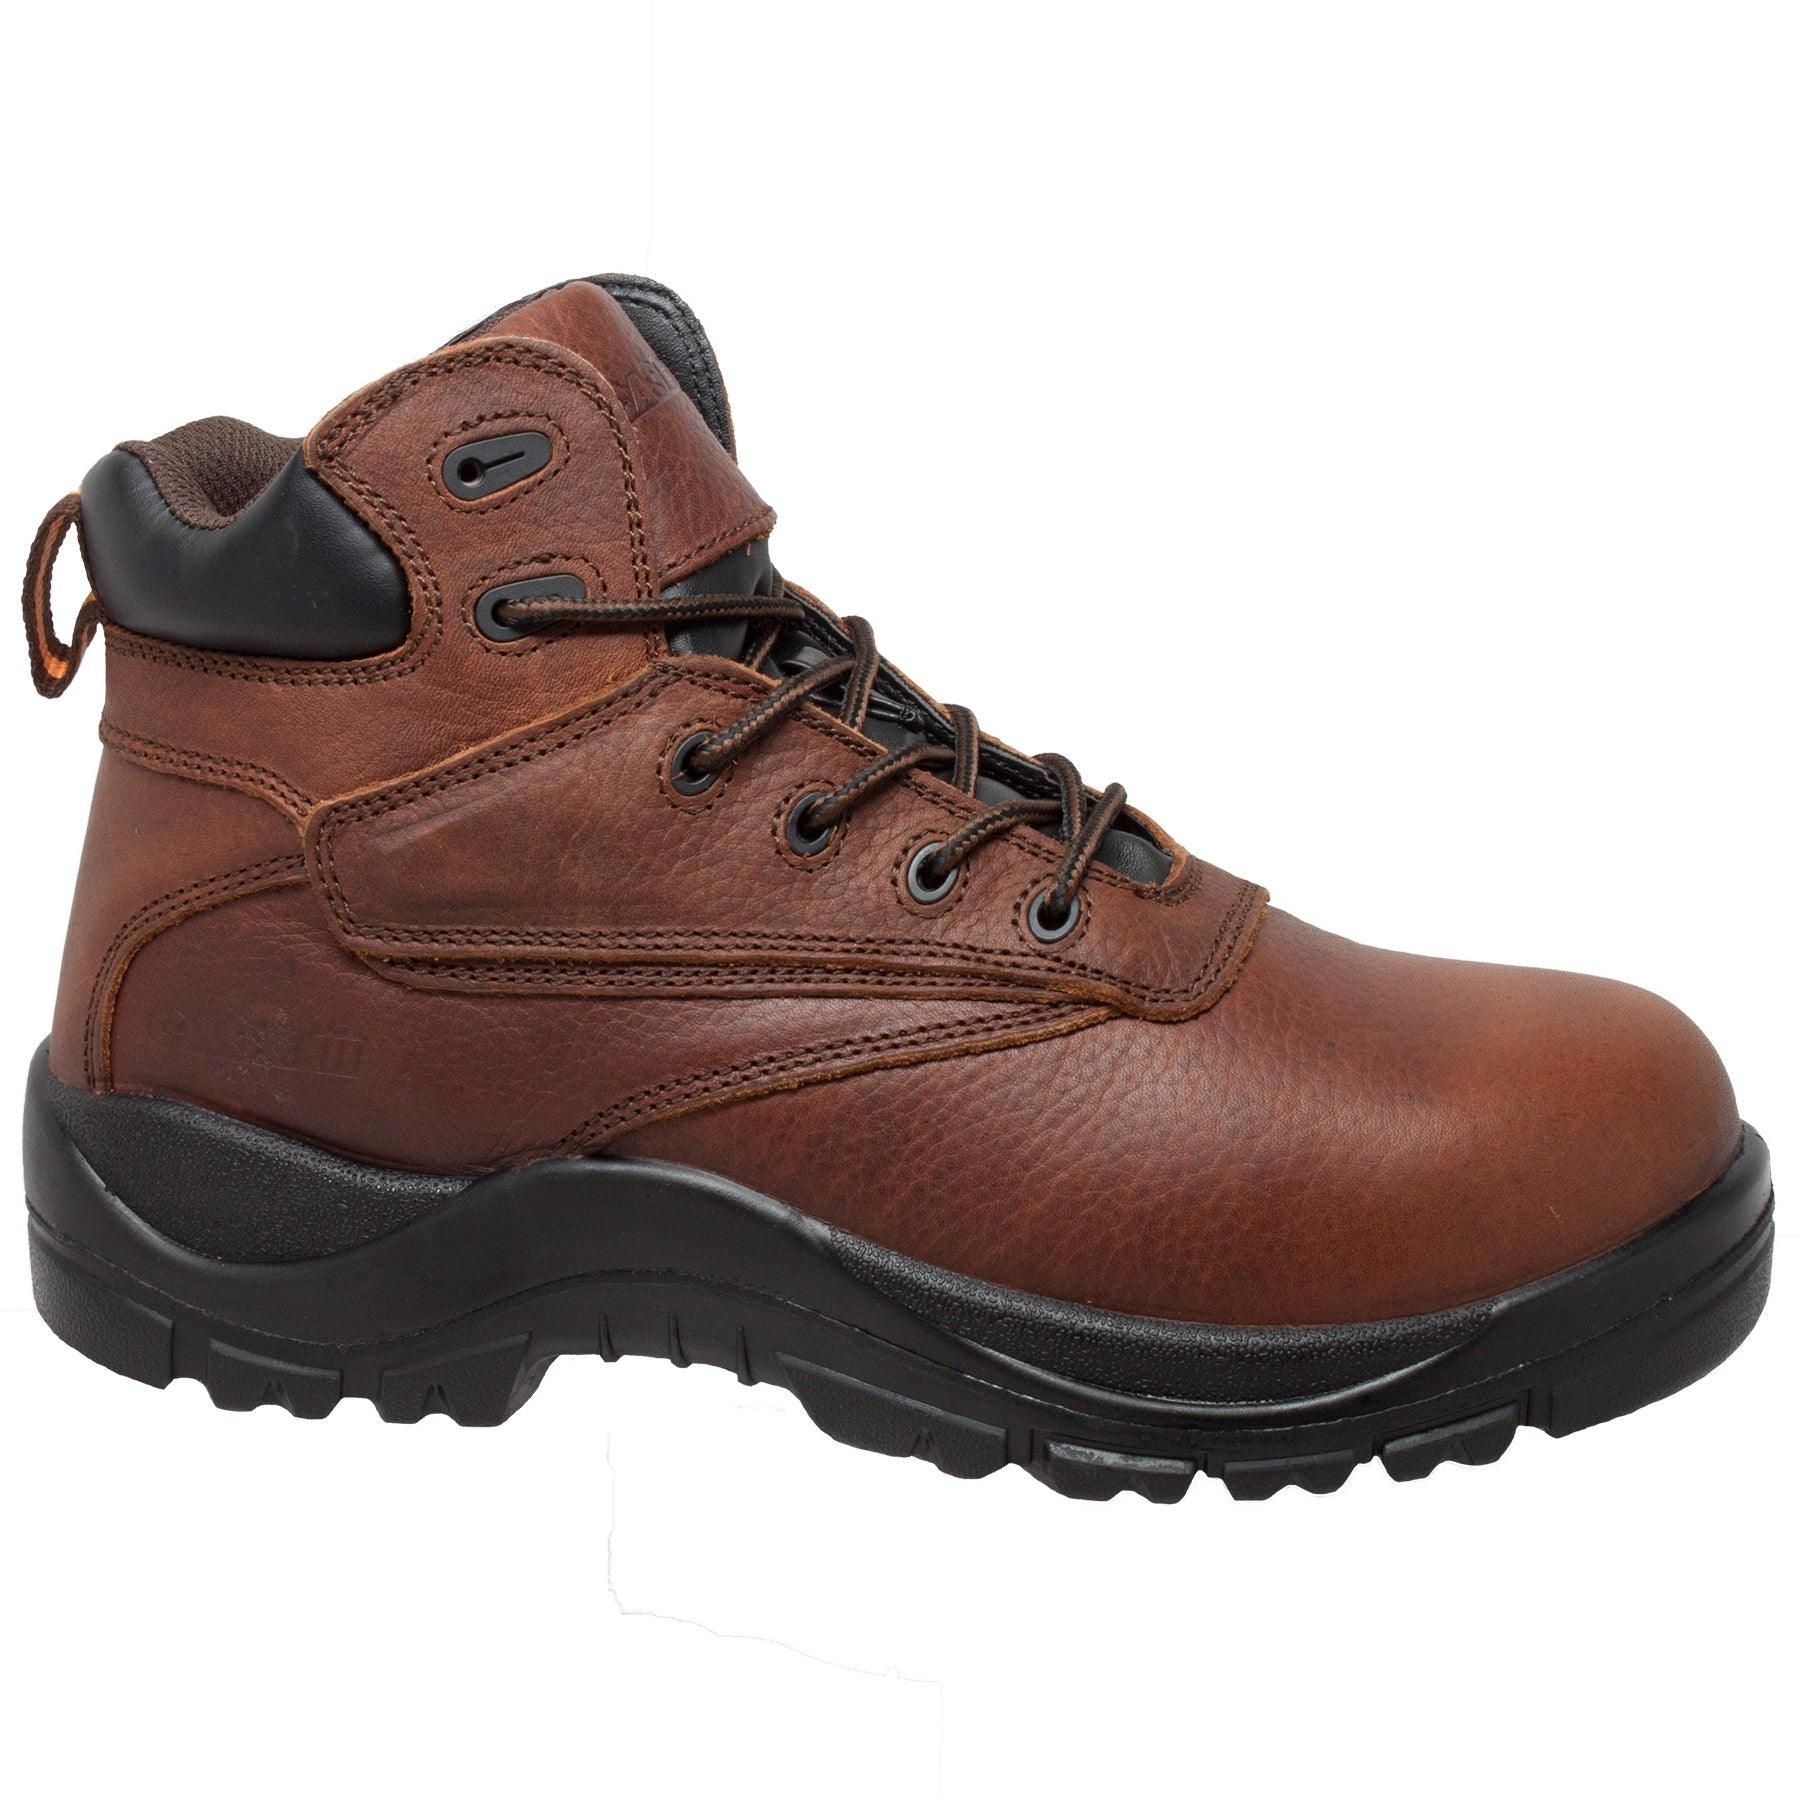 Case IH Mens 7 inch Wateproof Composite Safety Toe Brown - Flyclothing LLC